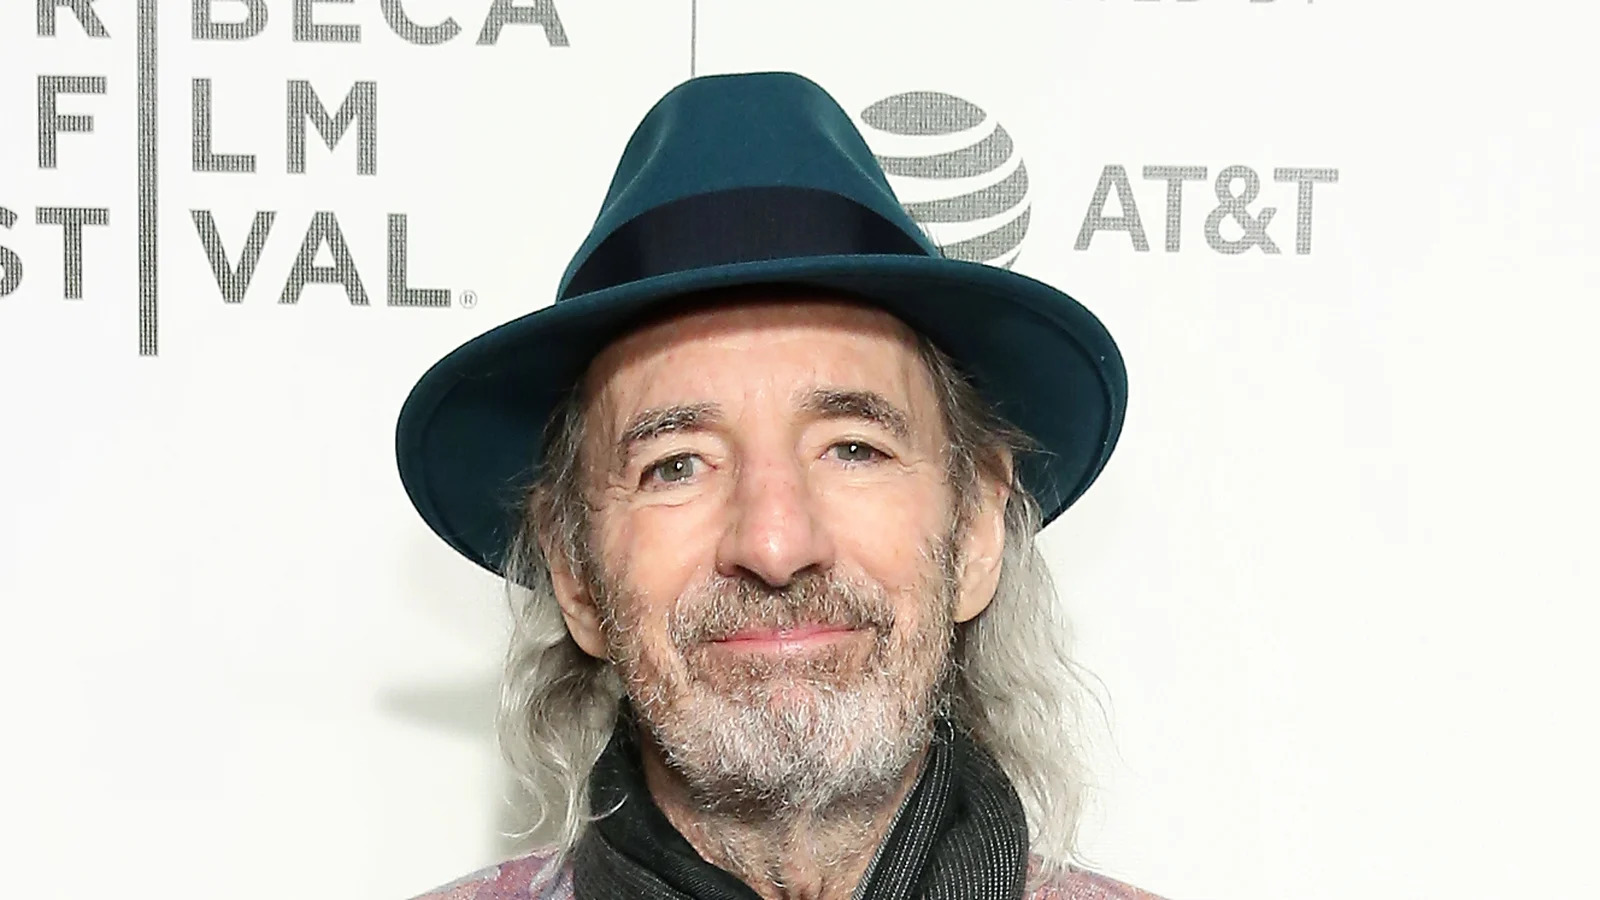 18 Fascinating Facts About Harry Shearer - Facts.net